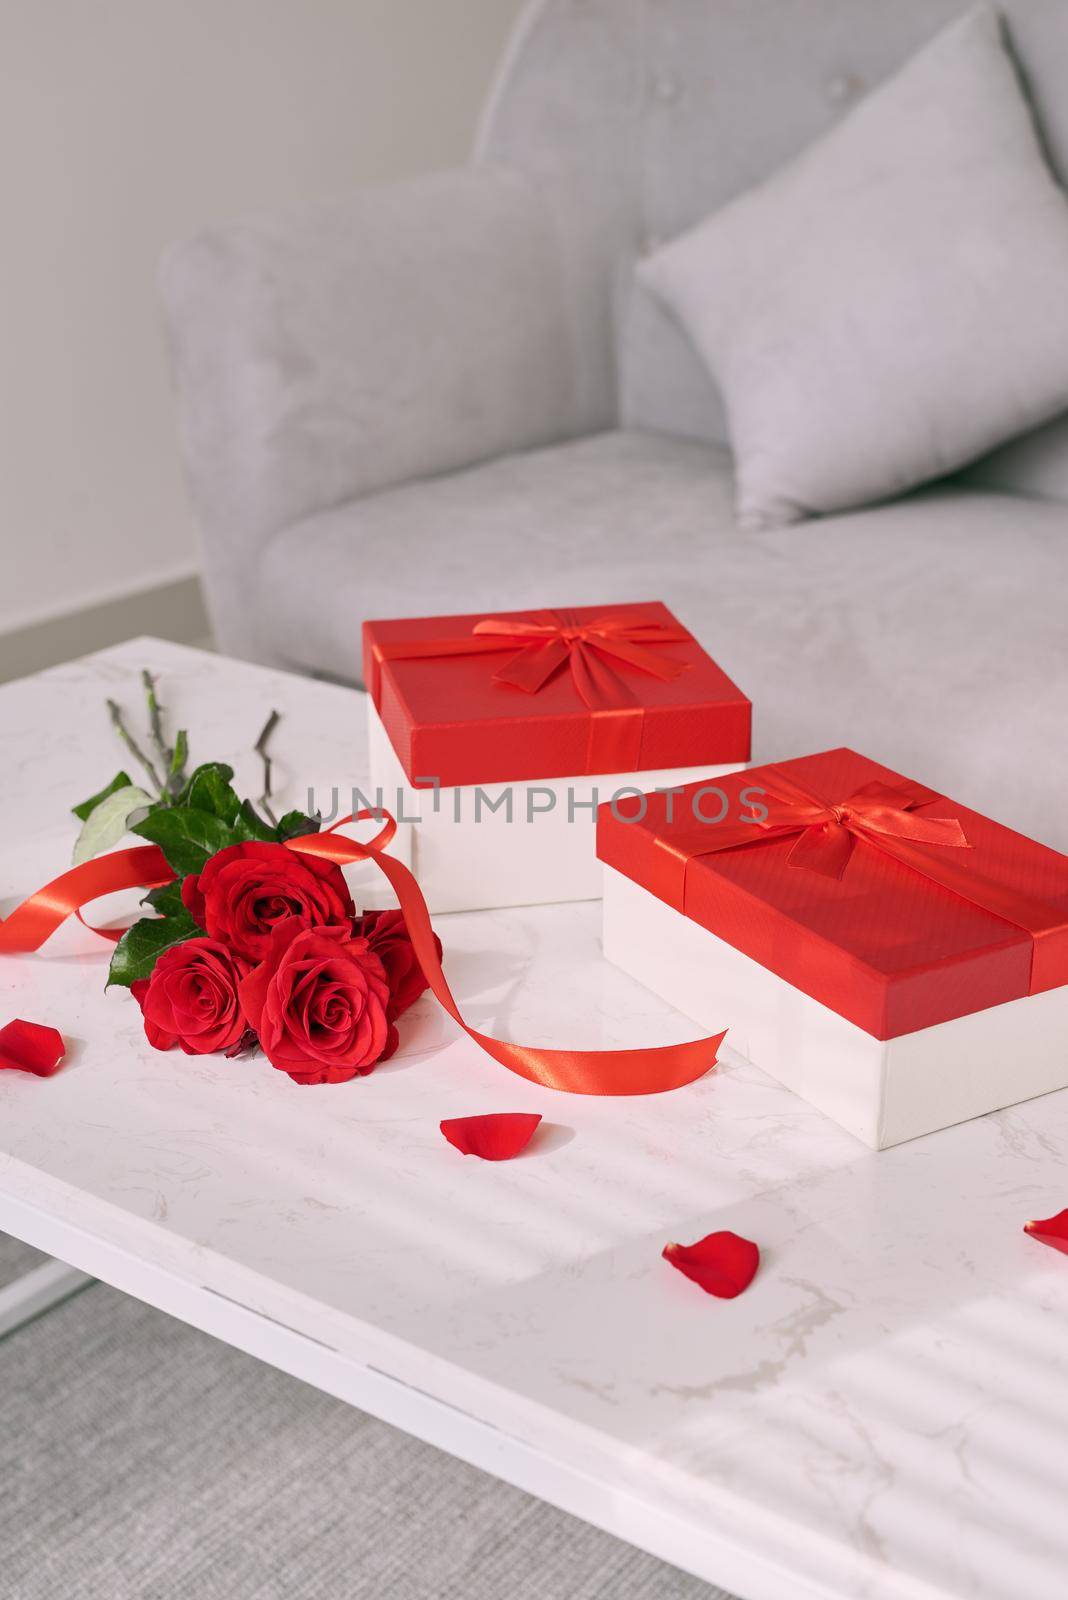 Mothers Day gifts and red rose on table.